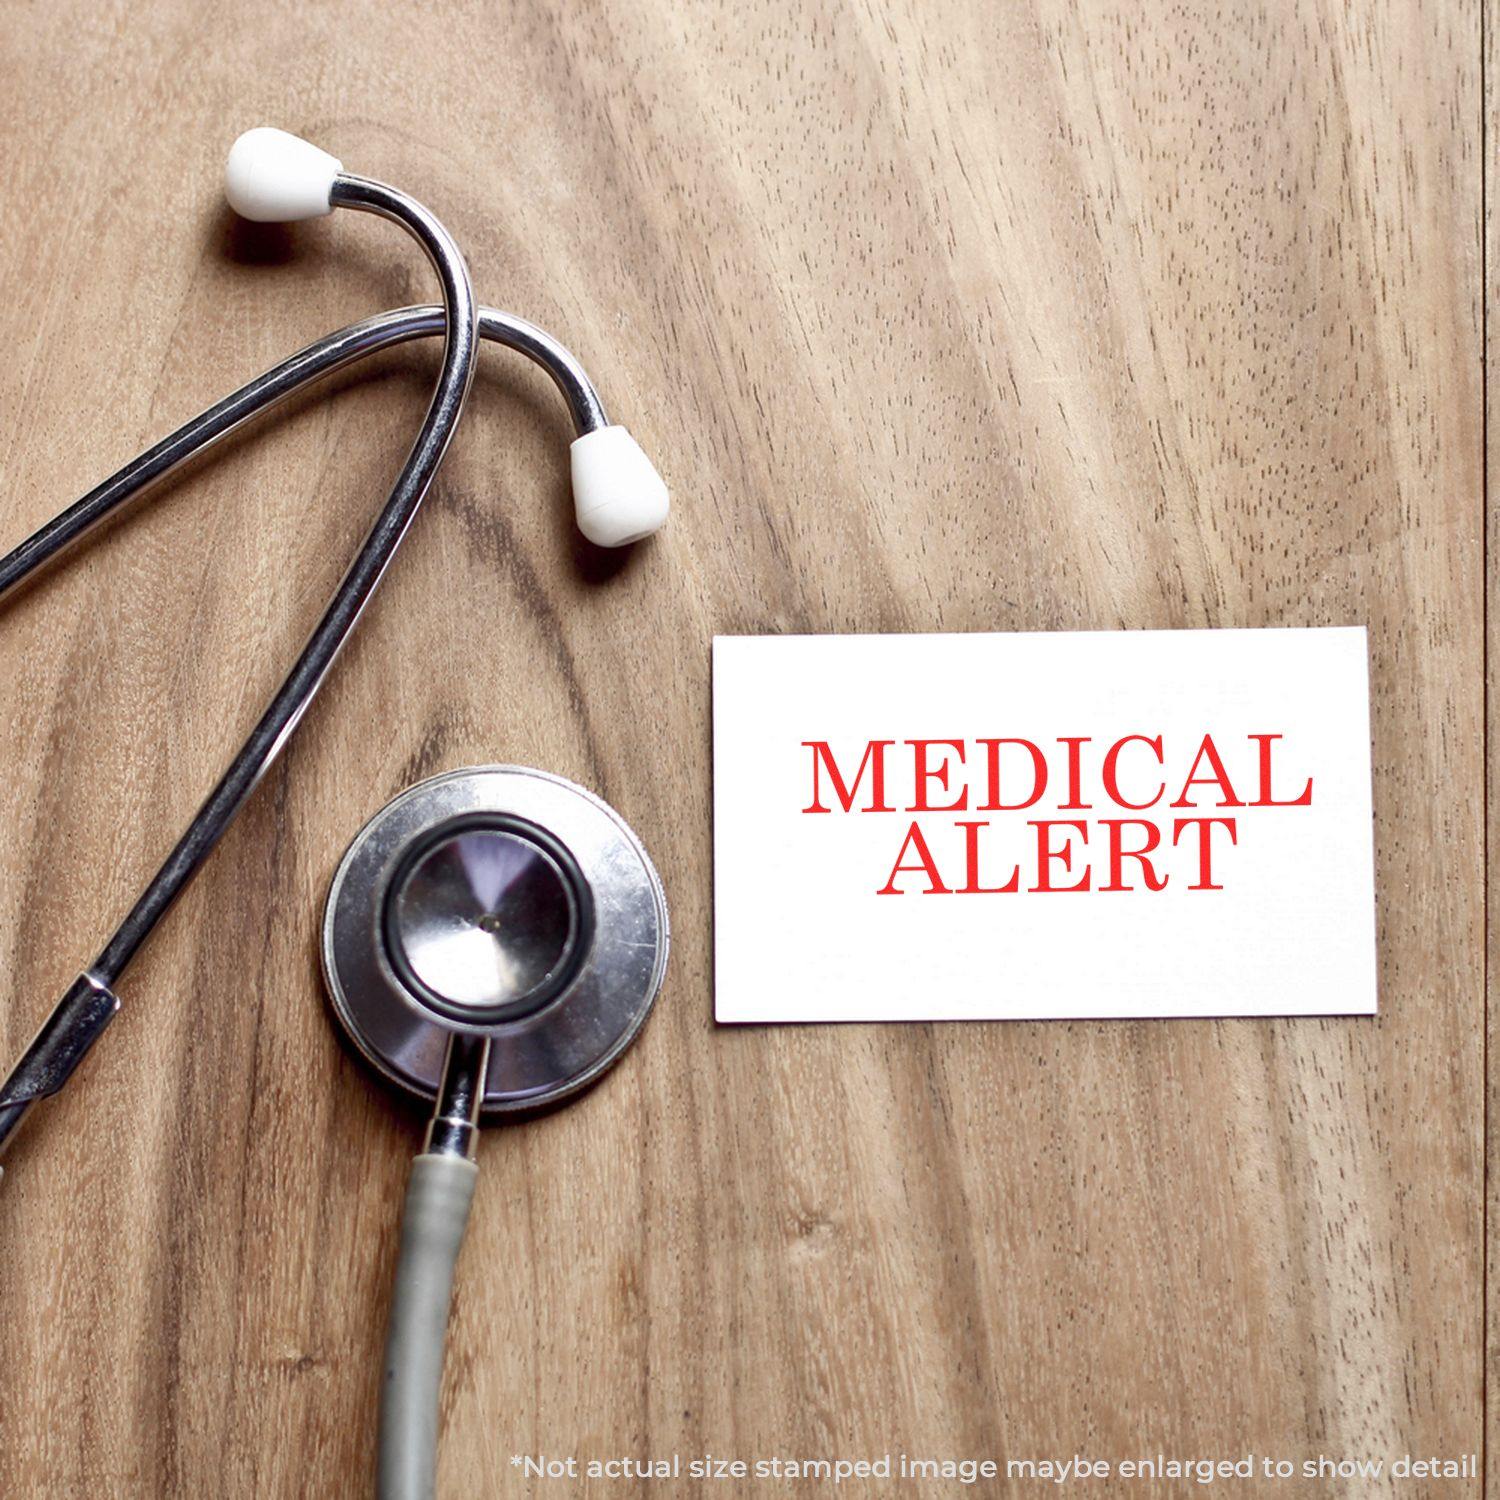 A stock office rubber stamp with a stamped image showing how the text "MEDICAL ALERT" is displayed after stamping.